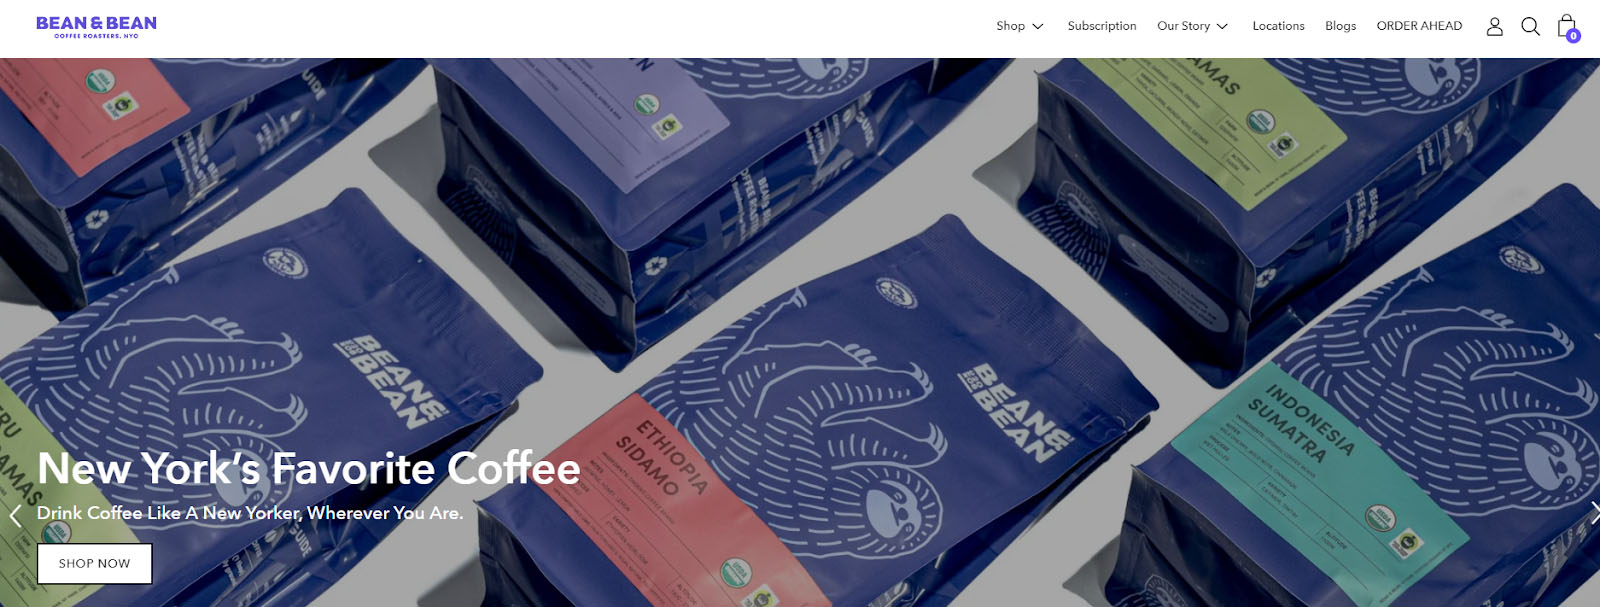 Screenshot of Bean & Bean coffee showing several types of coffees.